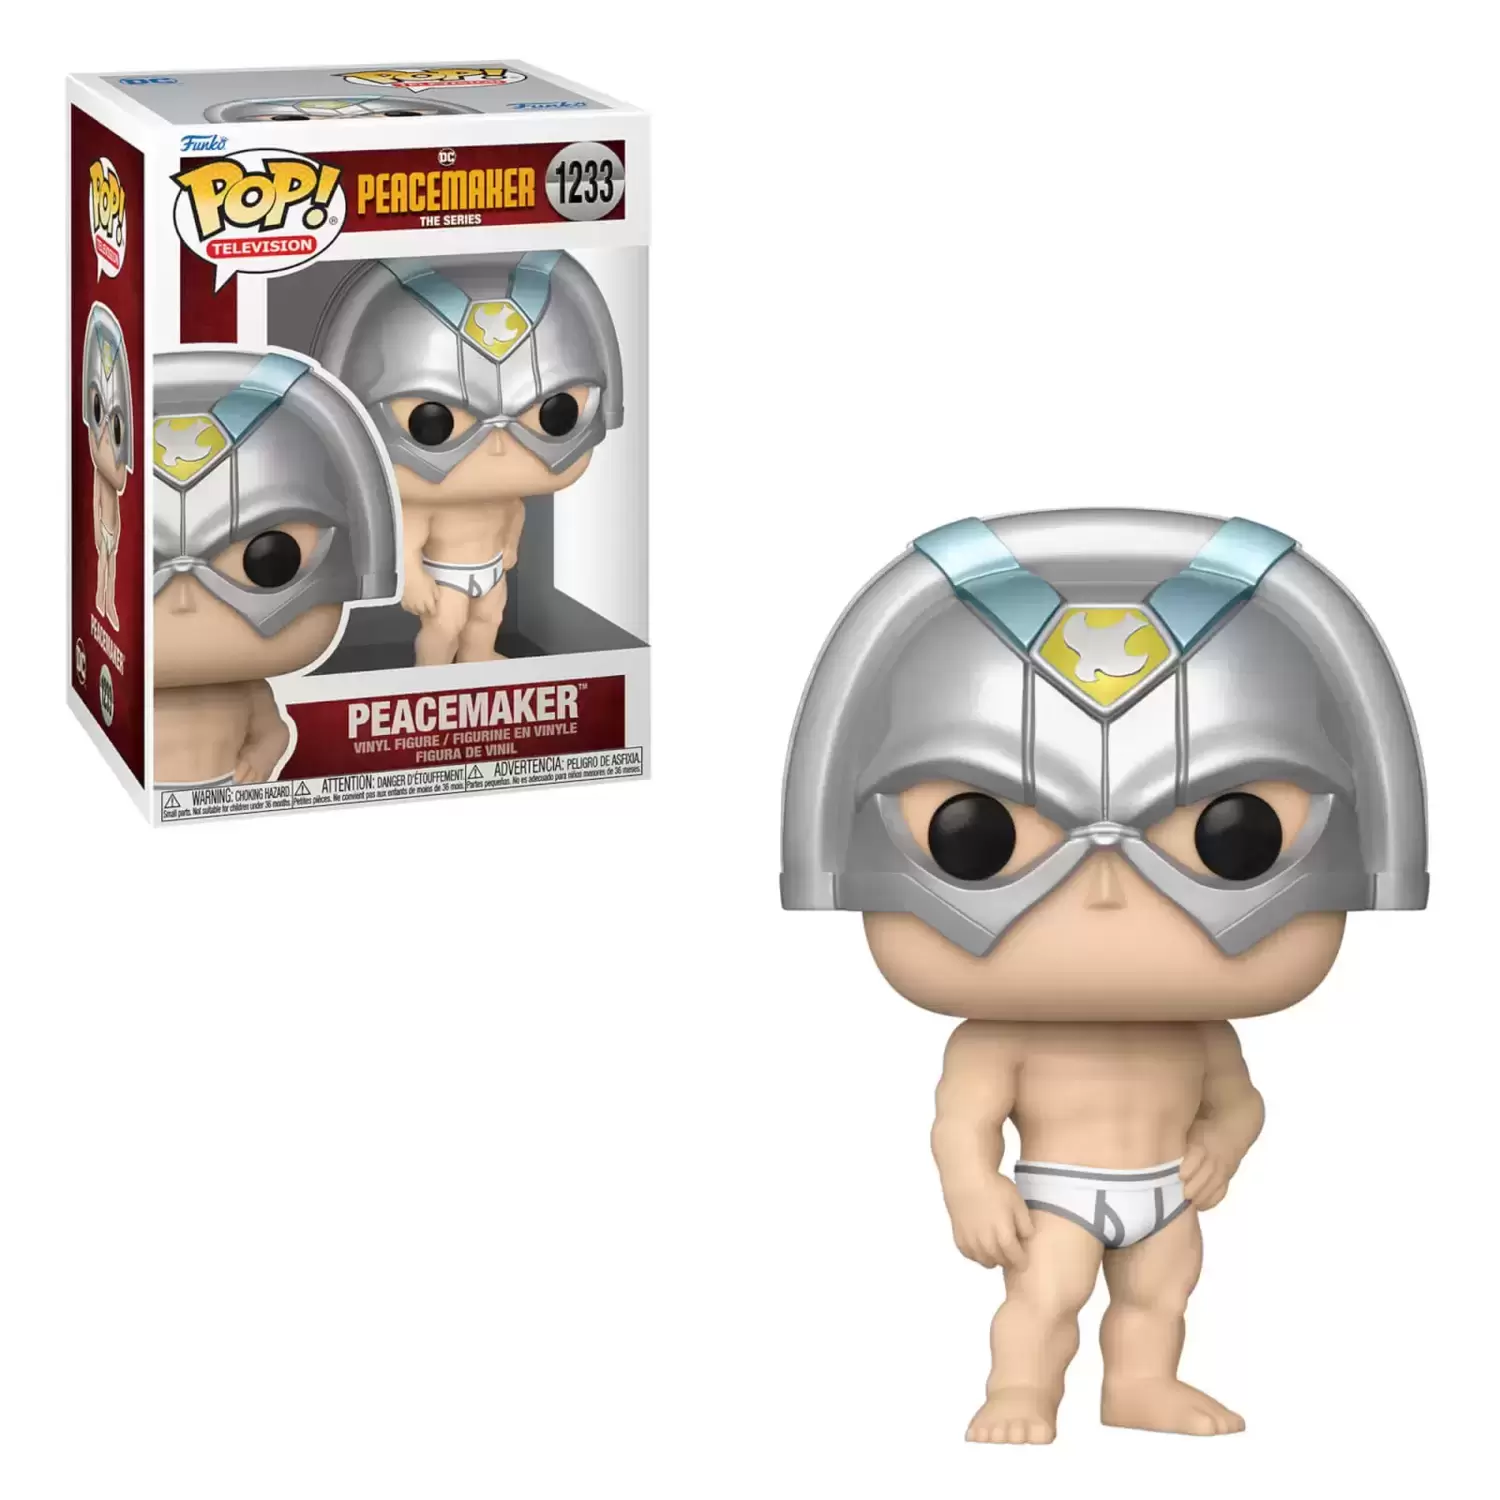 POP! Television - DC Peacemaker - Peacemaker (in Tighty-Whities)